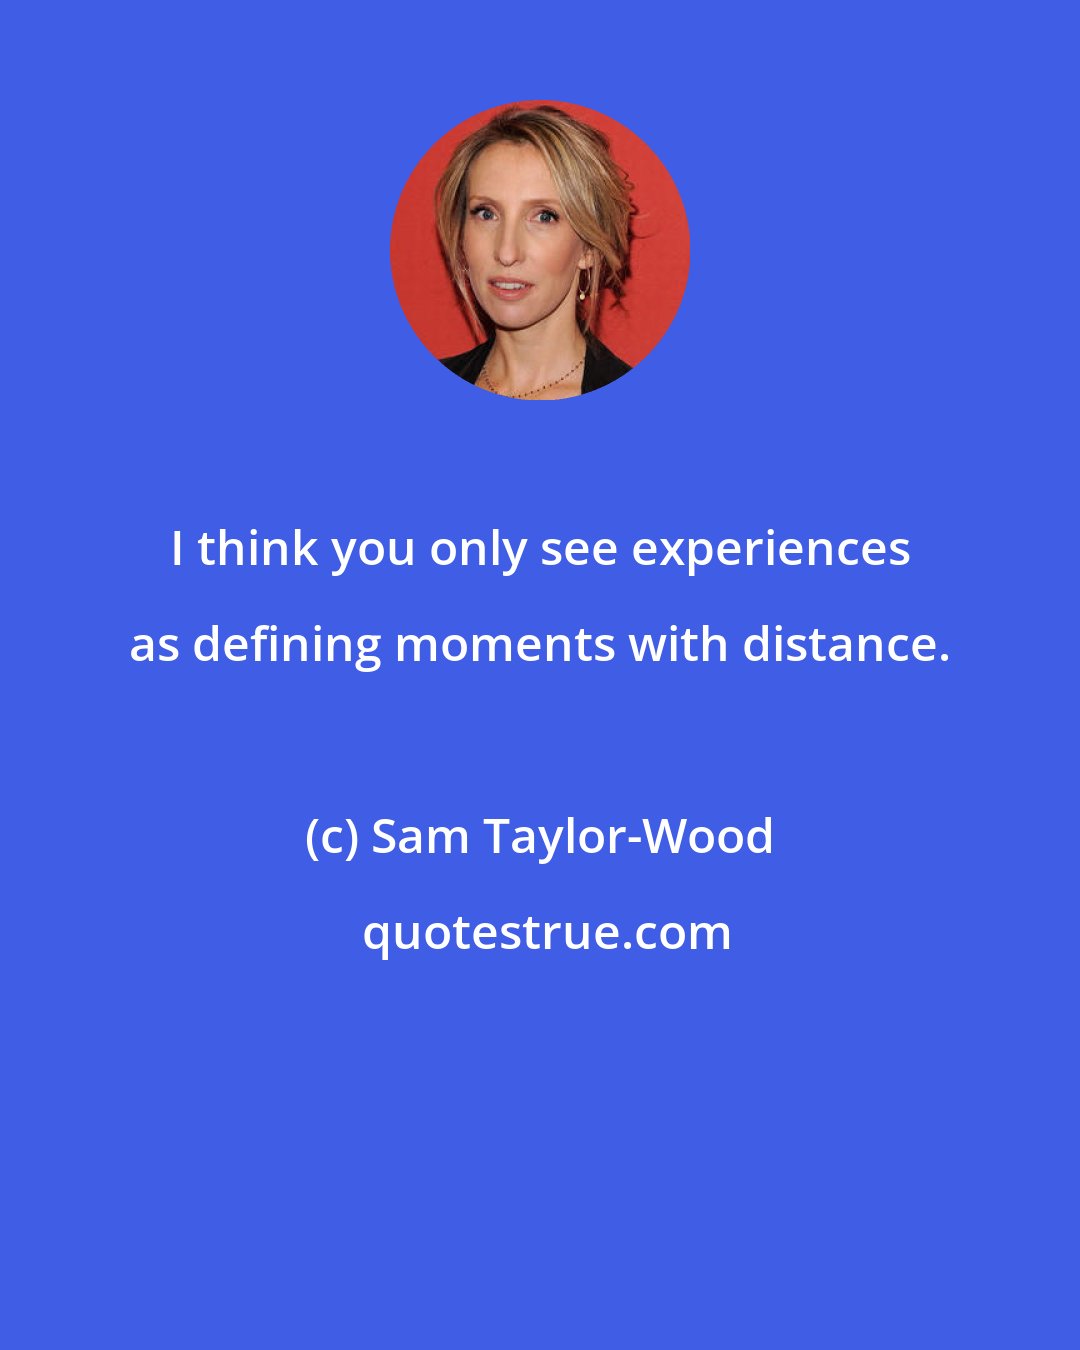 Sam Taylor-Wood: I think you only see experiences as defining moments with distance.